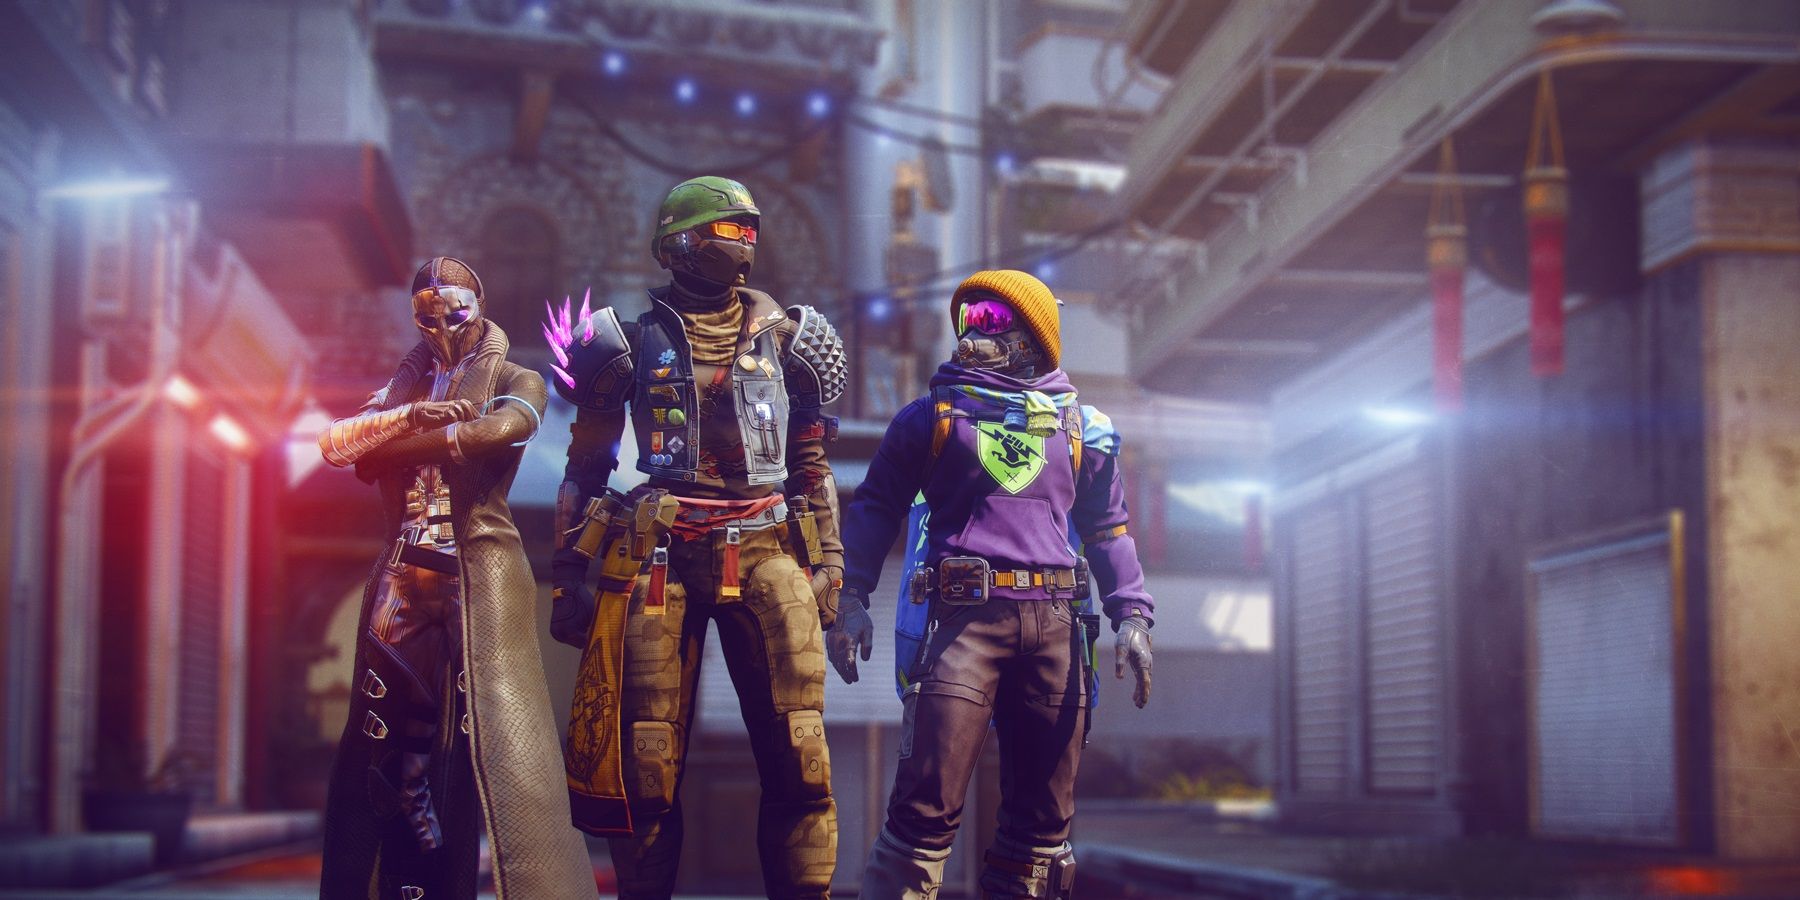 A fireteam of Guardians decked out with cosmetic gear look stylish in the tower